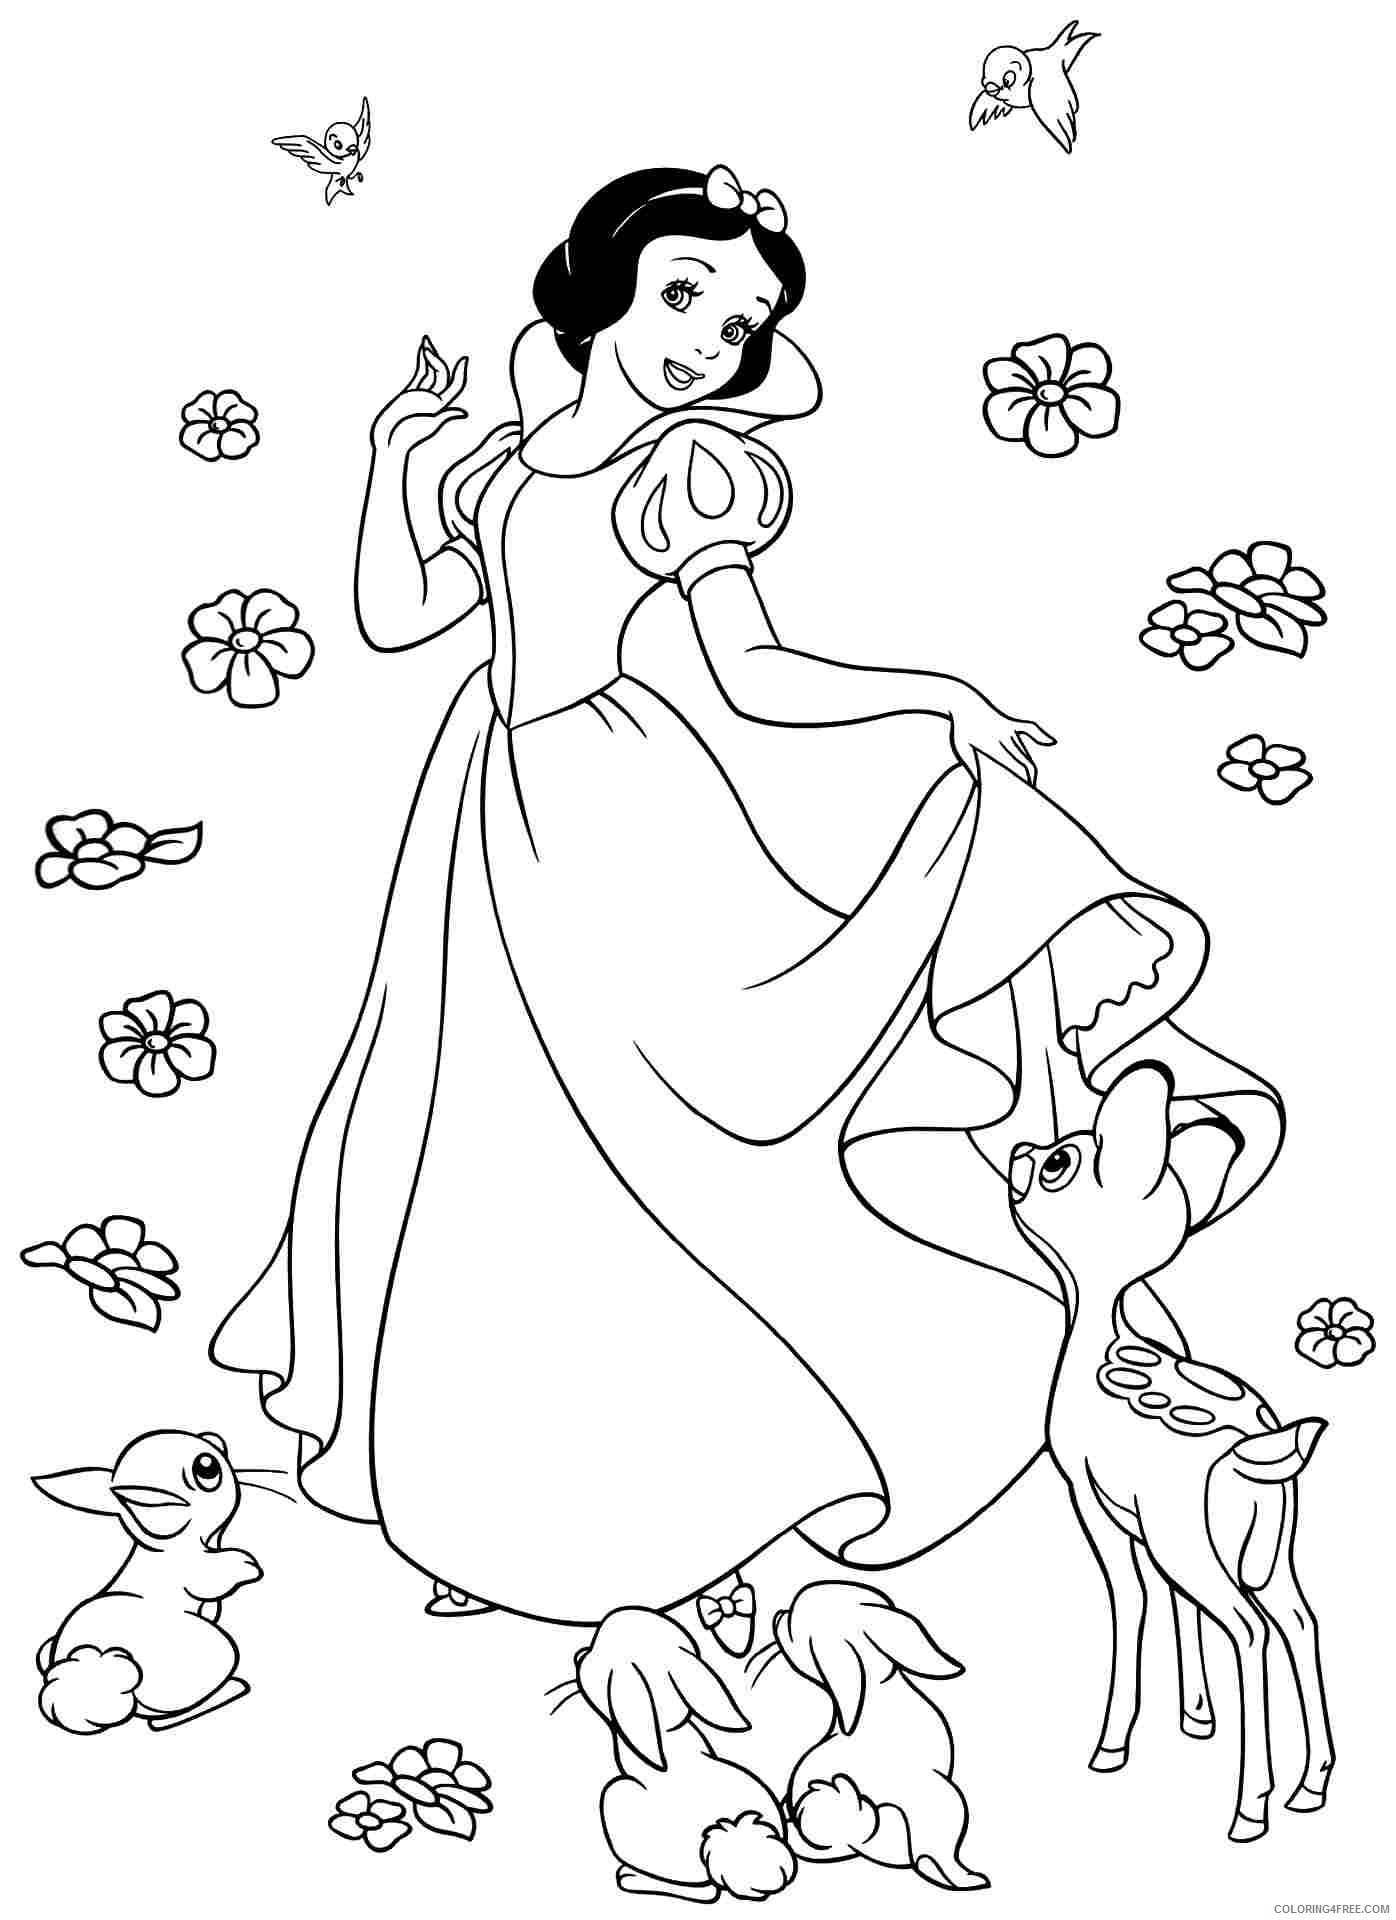 Snow White Coloring Pages Cartoons Print Free Snow White Printable 2020 5719 Coloring4free